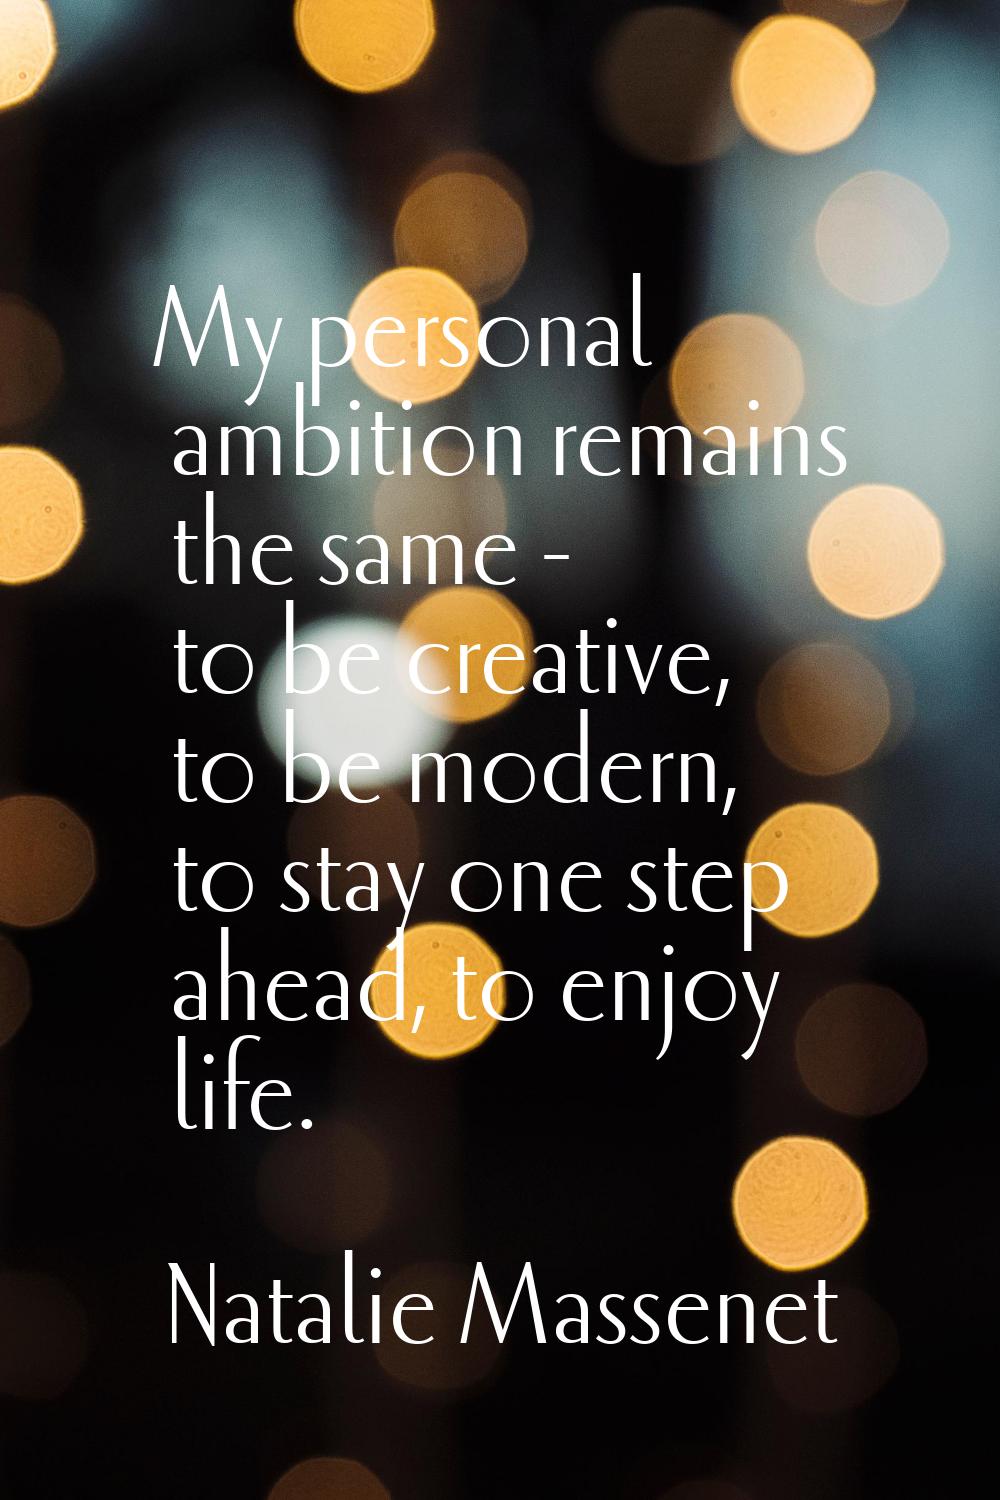 My personal ambition remains the same - to be creative, to be modern, to stay one step ahead, to en